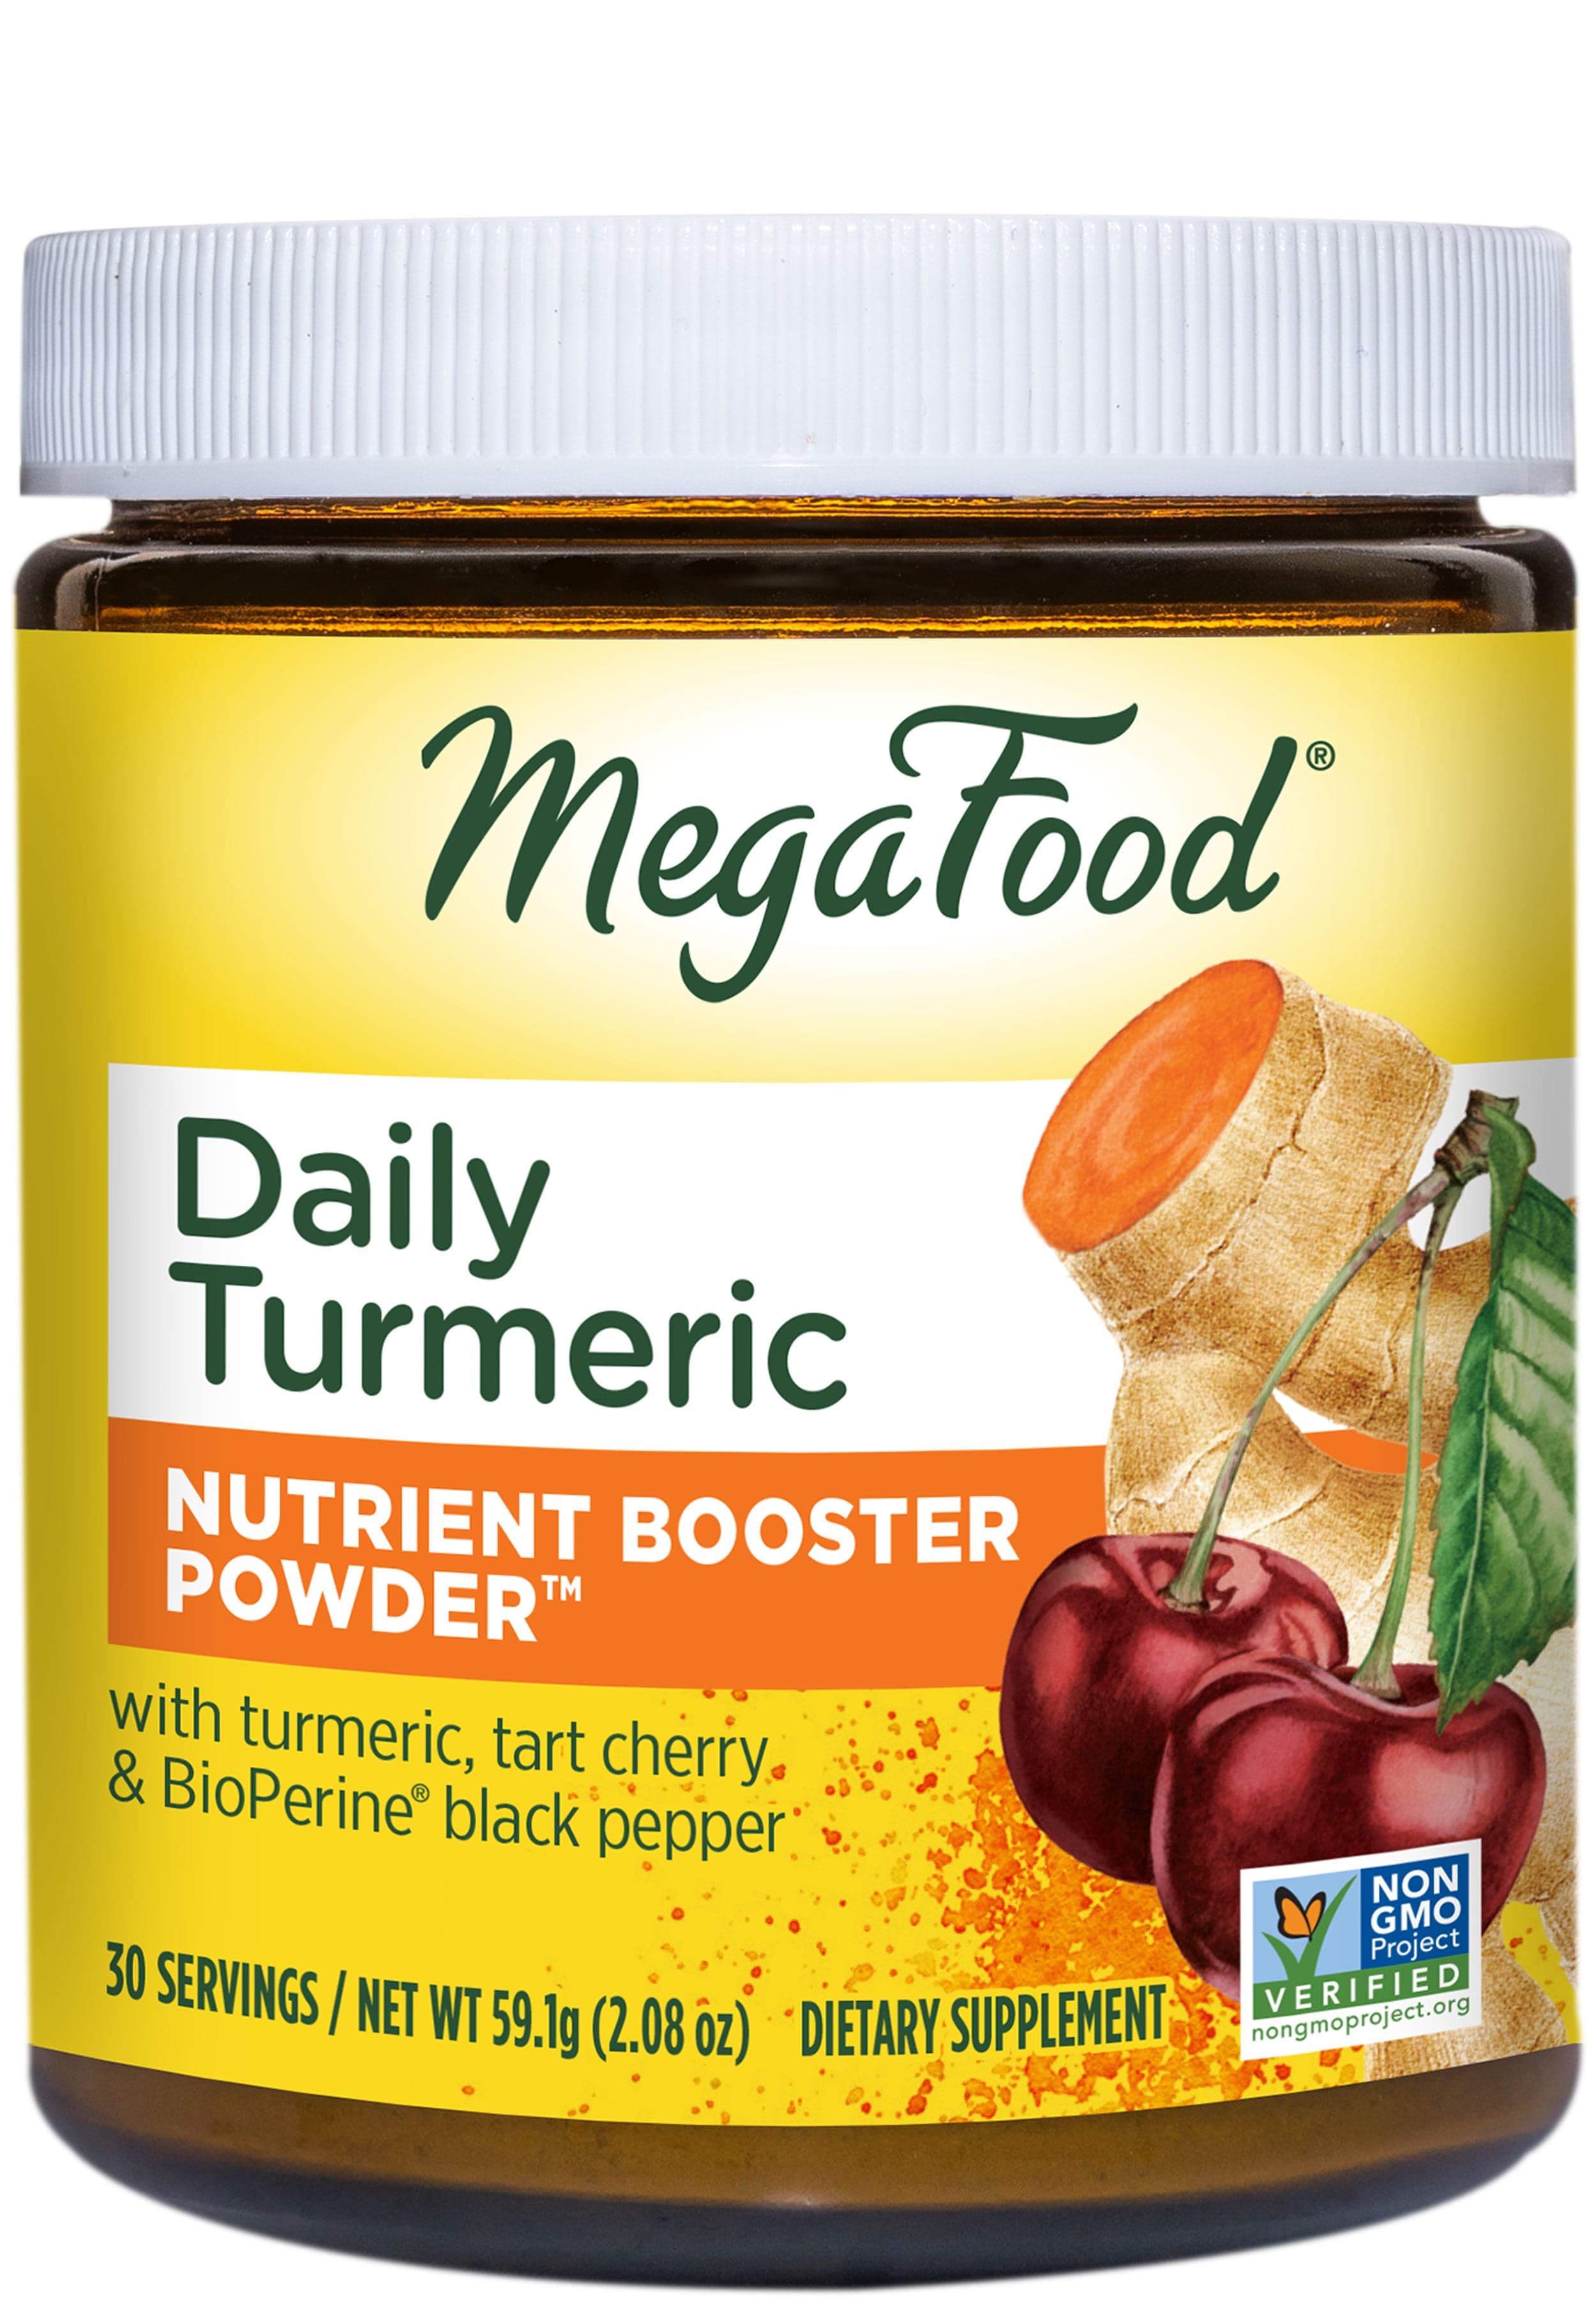 MegaFood Daily Turmeric Nutrient Booster Powder